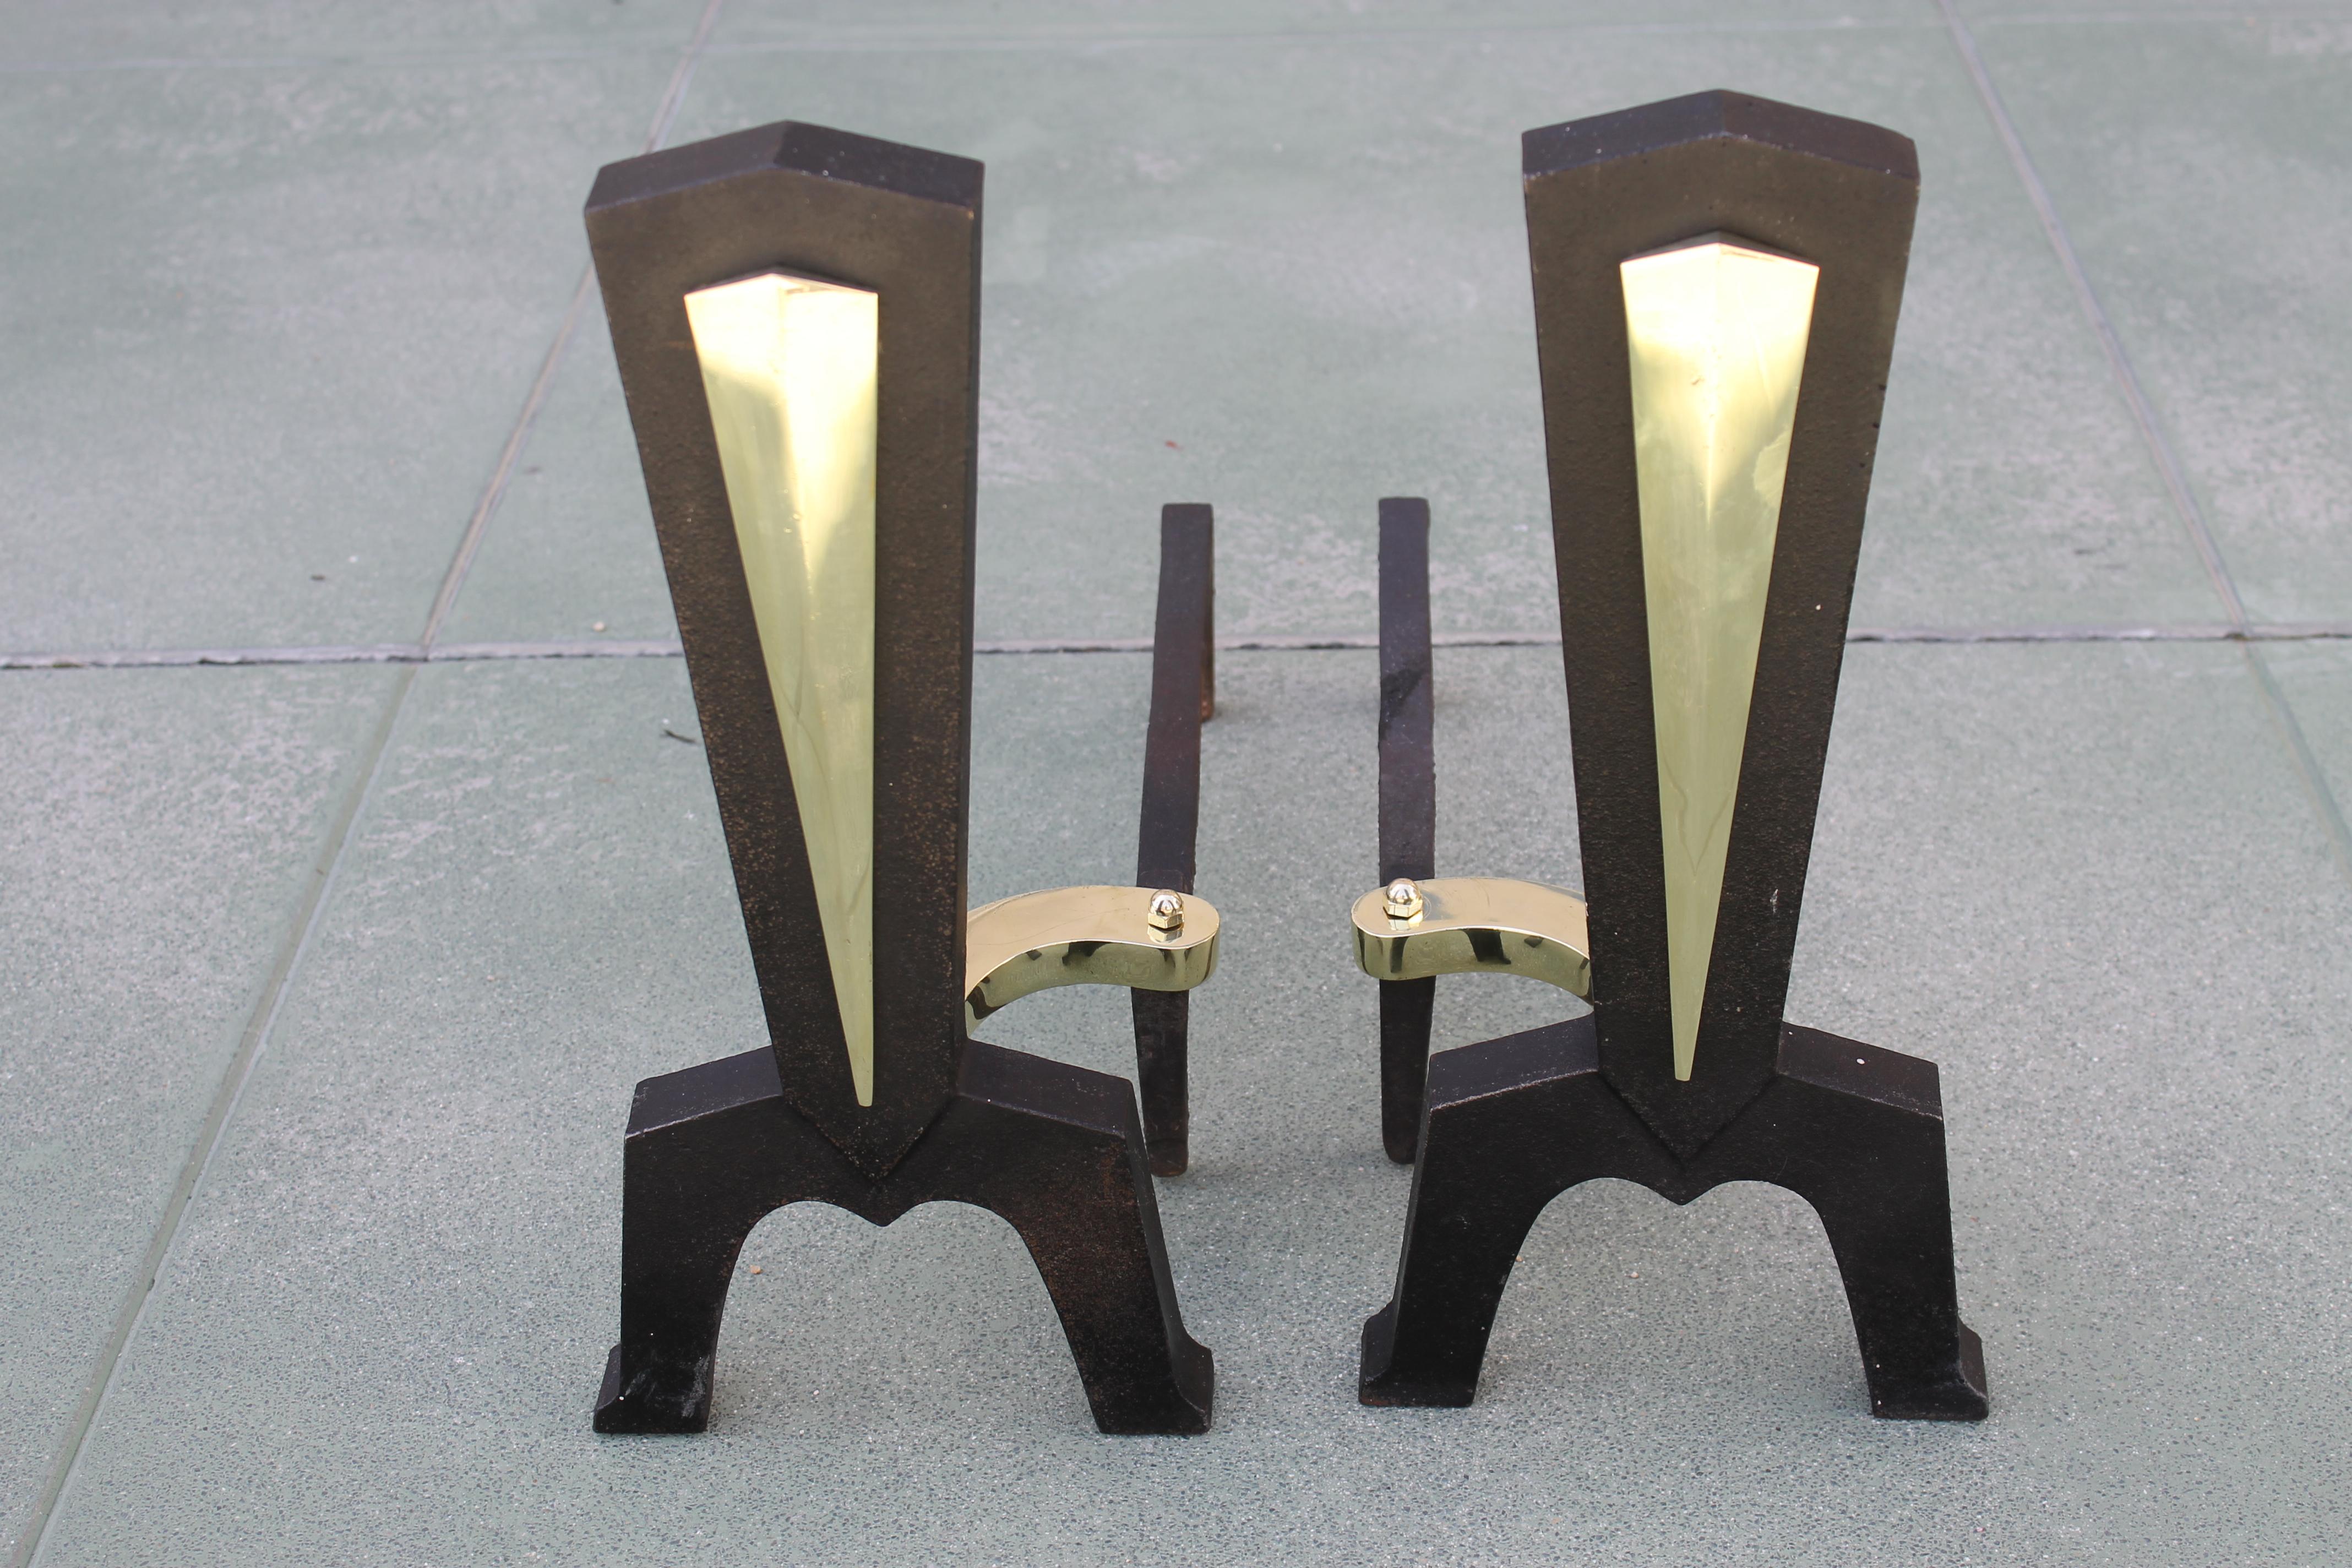 Pair of midcentury fireplace andirons. We're reasonable sure they were designed by Donald Deskey. Brass portions have been polished. They measure 7” wide 17.5” deep and 16” high.